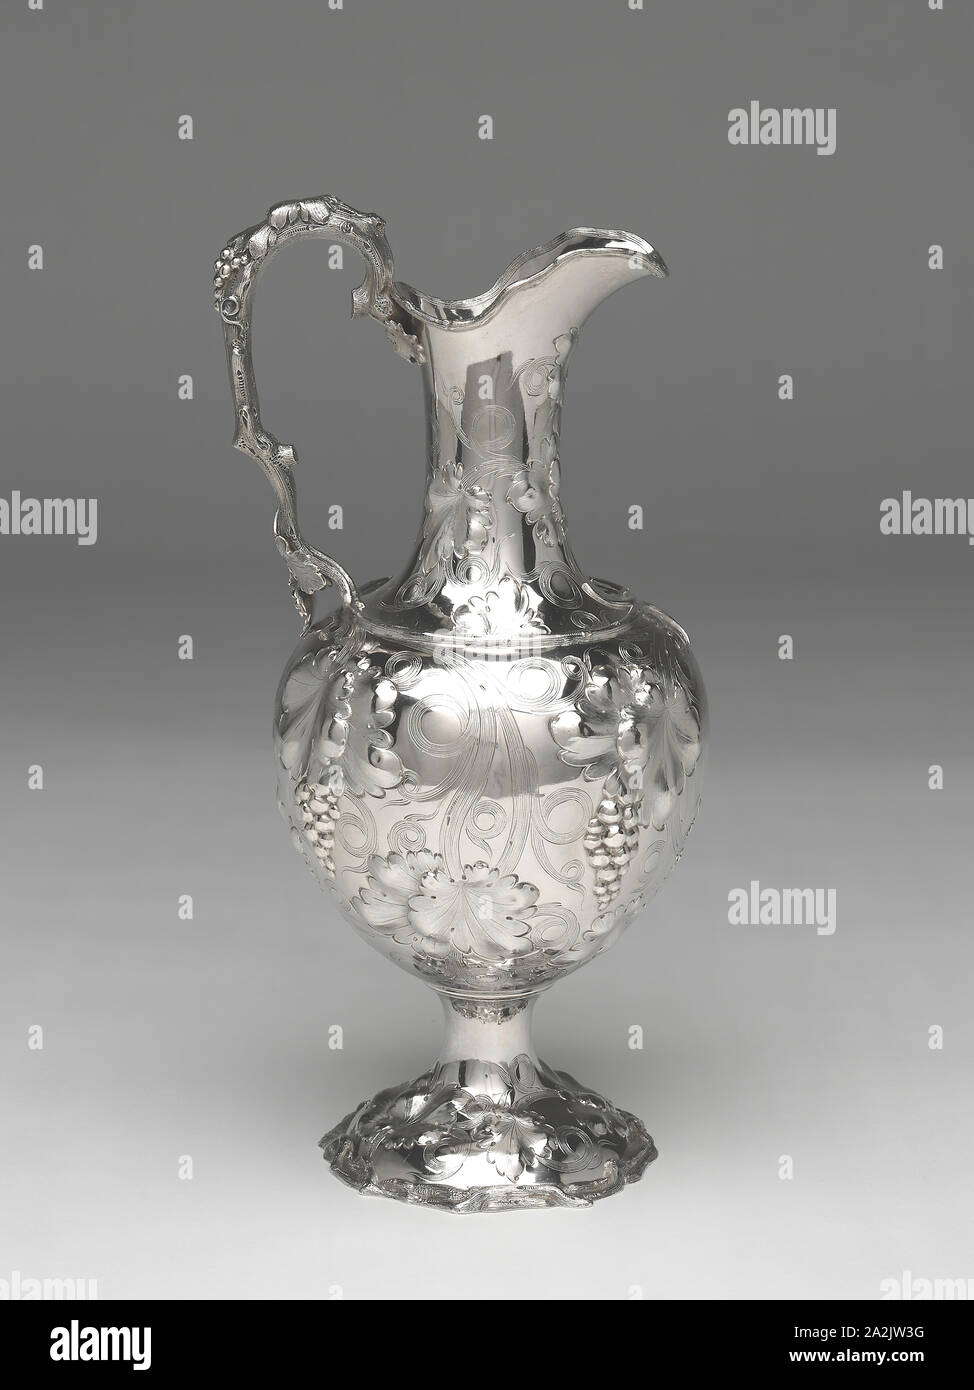 Pitcher, 1855/63, Cann and Dunn, American, 1855–1860, Retailed by John Cox and Co., American, active 1817–1863, New York, New York, Silver, 38.1 × 15.2 × 17.8 cm (15 1/4 × 6 1/2 × 7 1/2 in Stock Photo